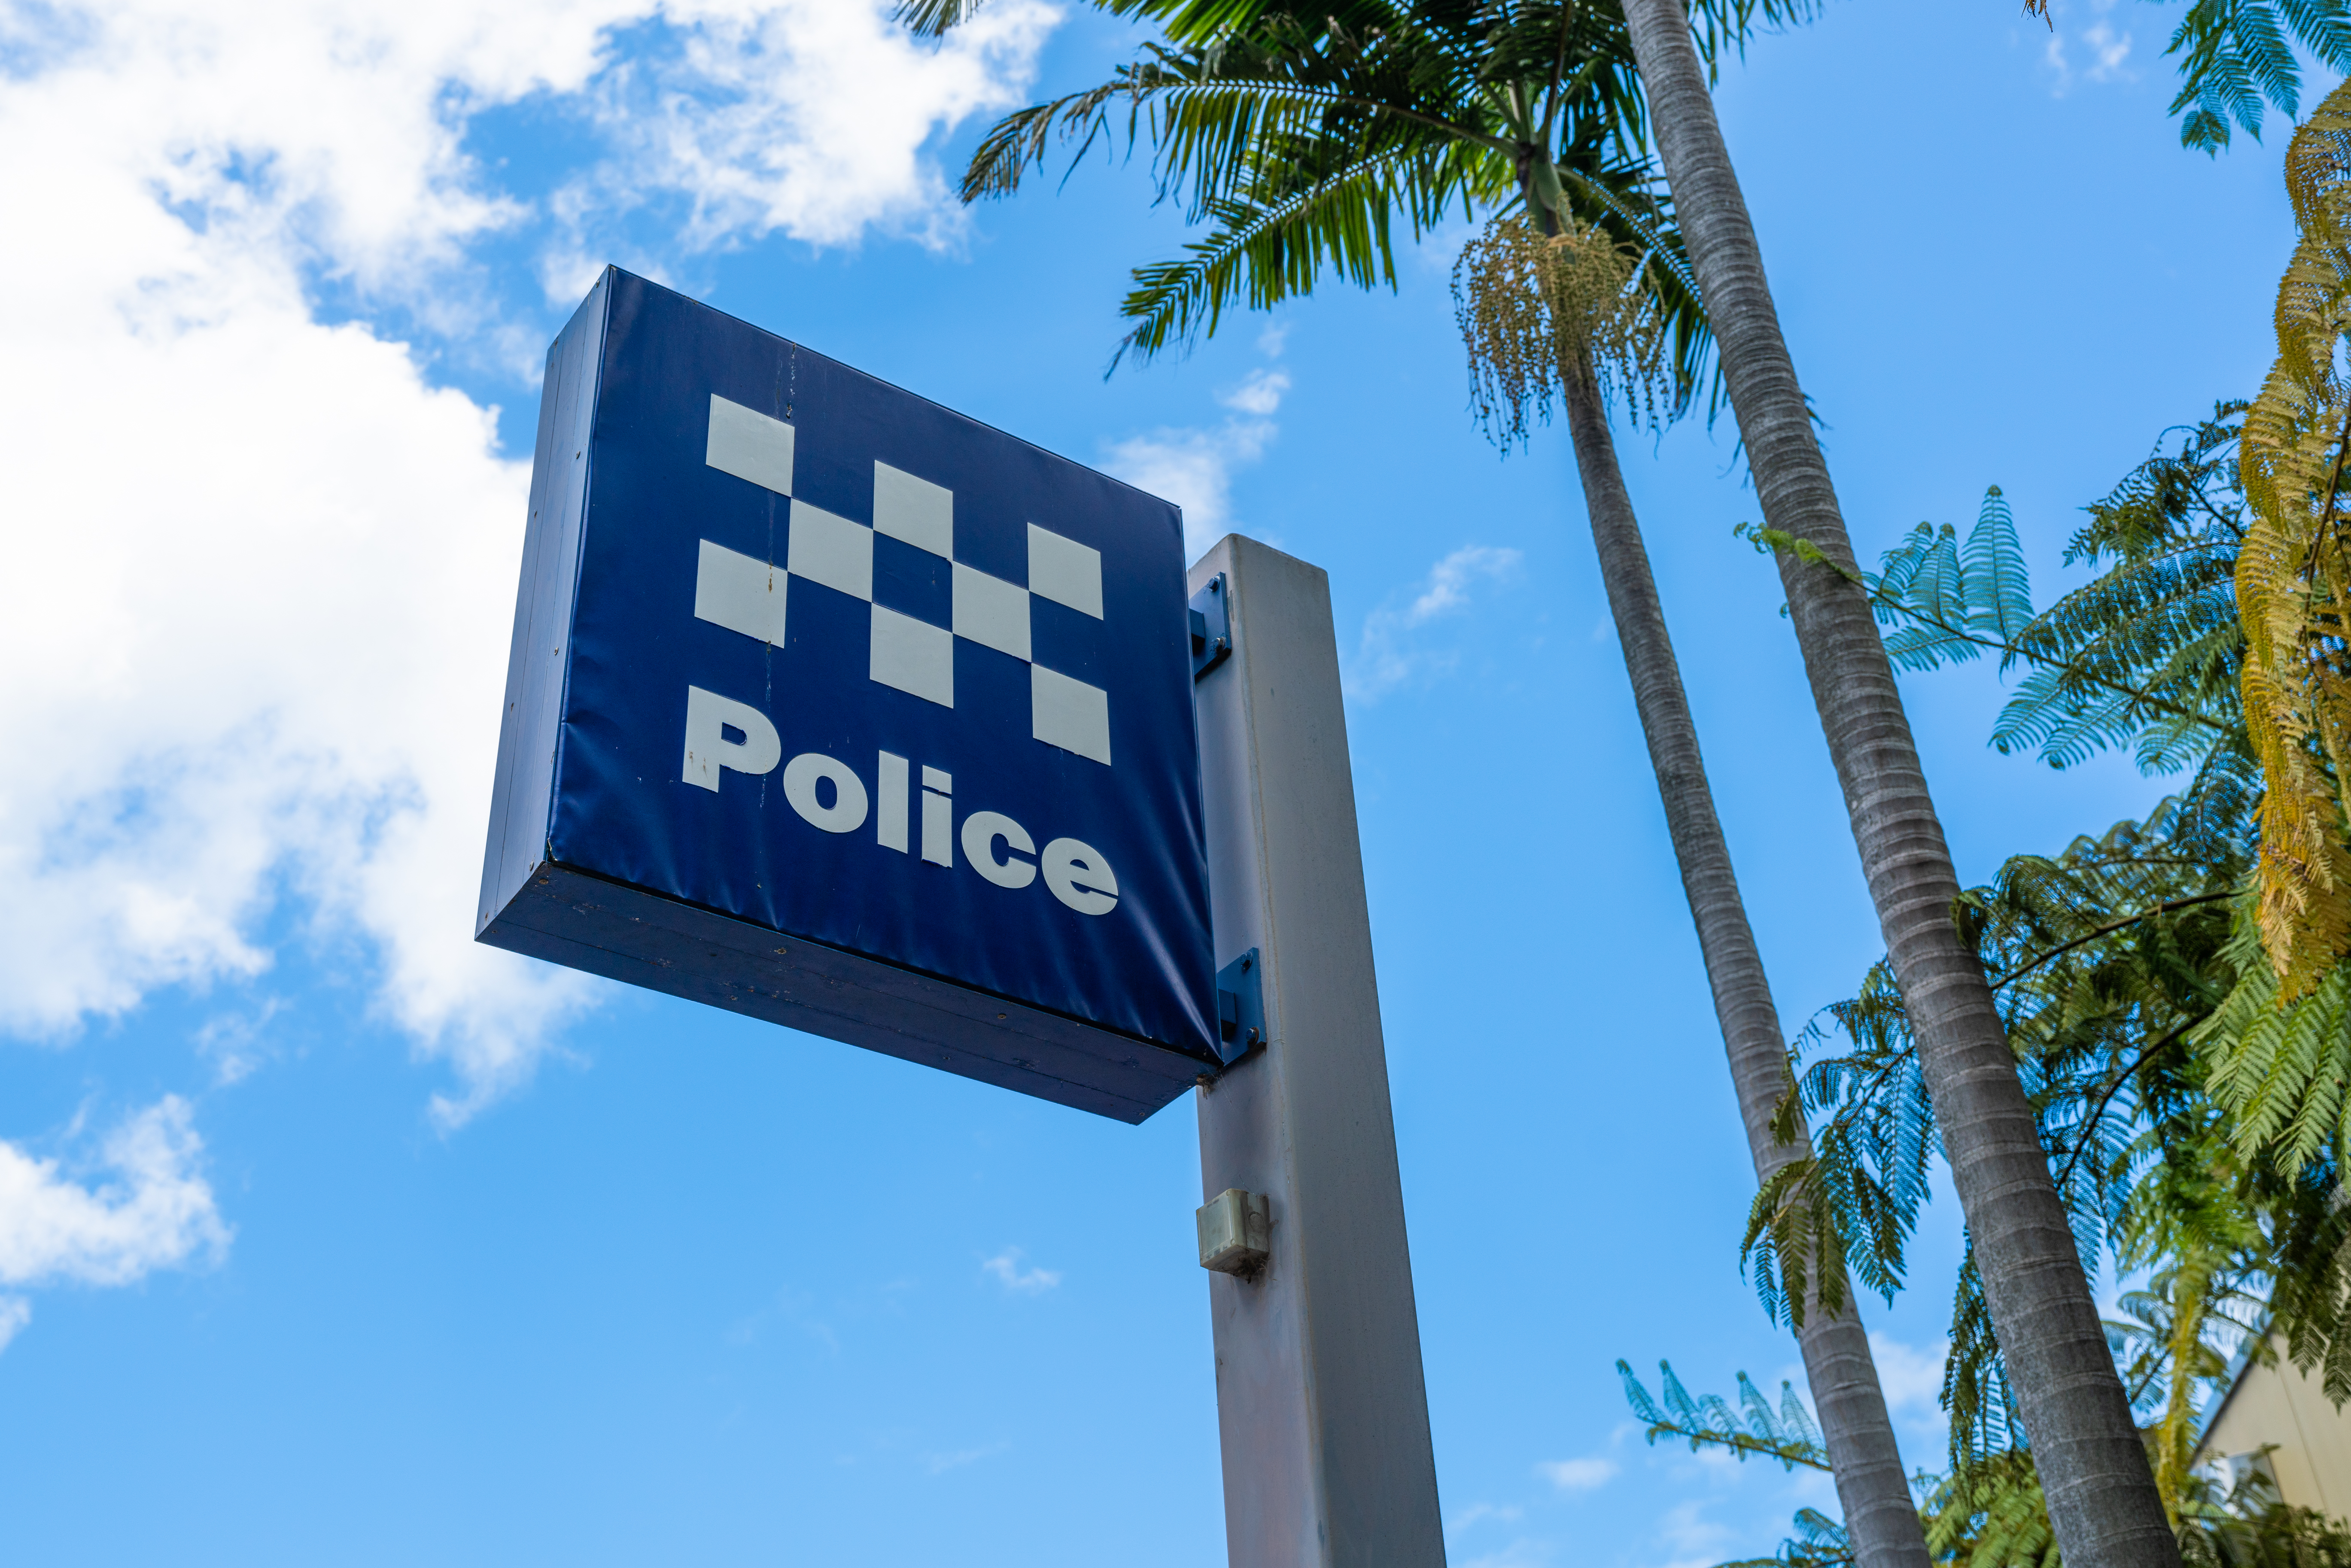 NSW Police sign next to trees outside.